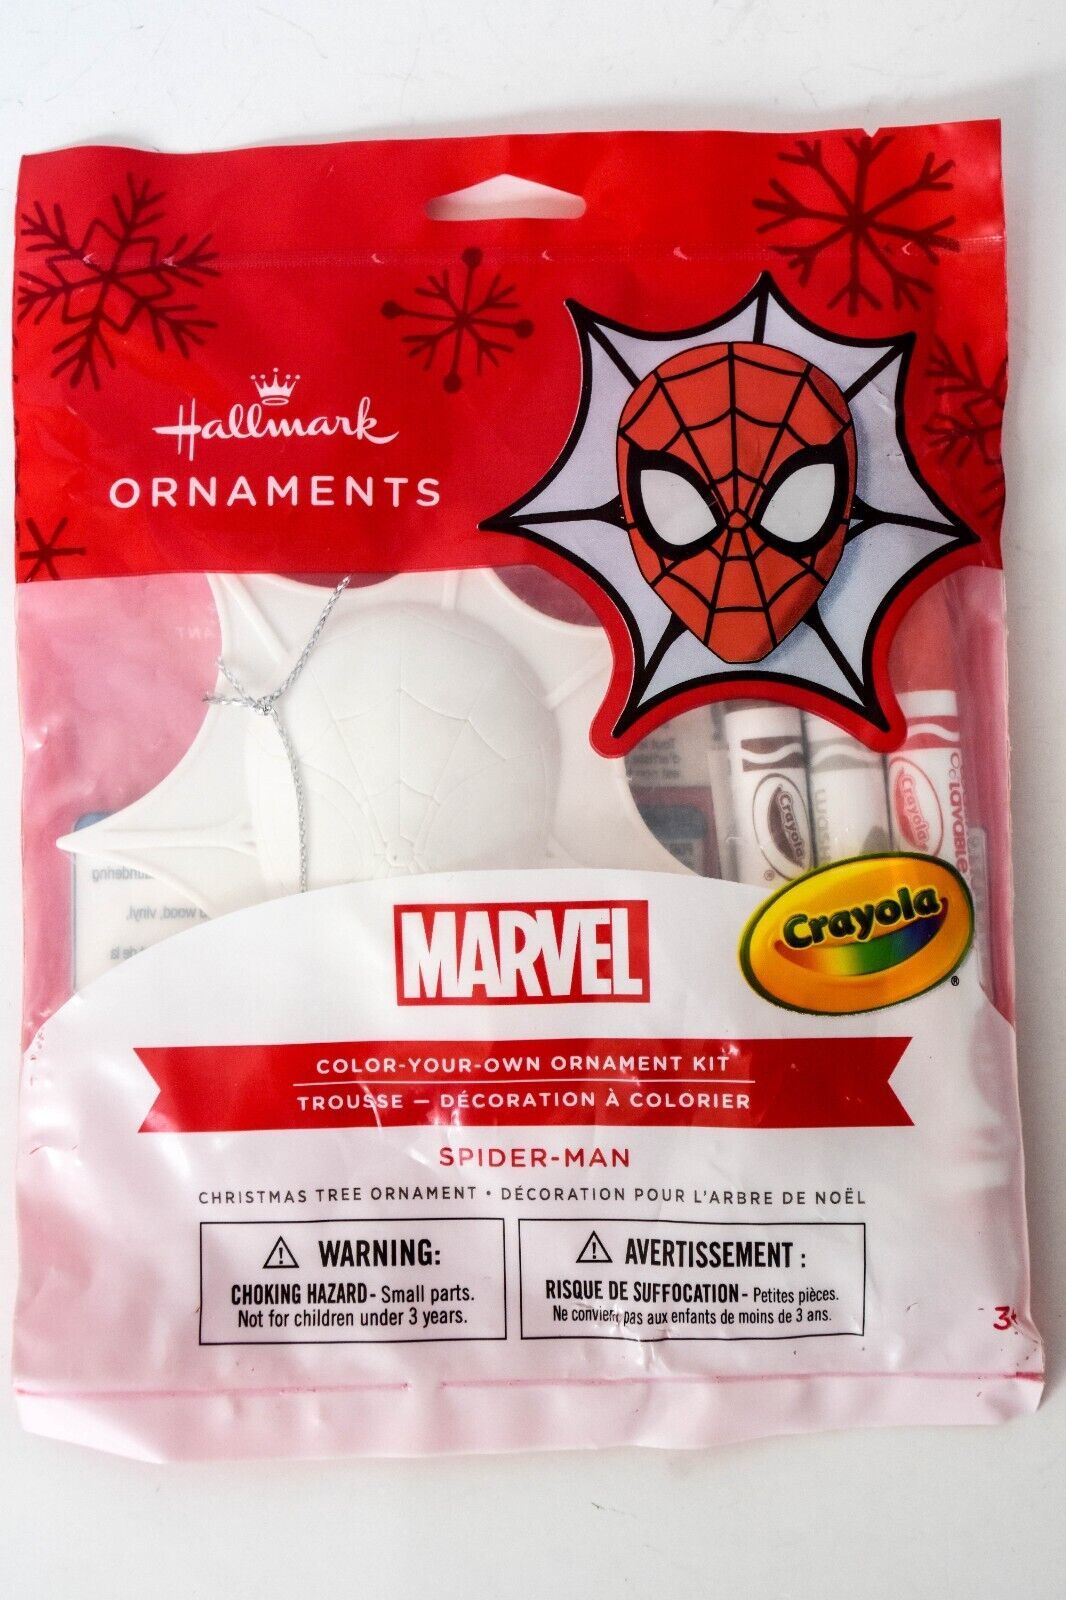 Primary image for Hallmark Spider-man Color Your Own Ornament - Crayola Kit - Marvel Avengers